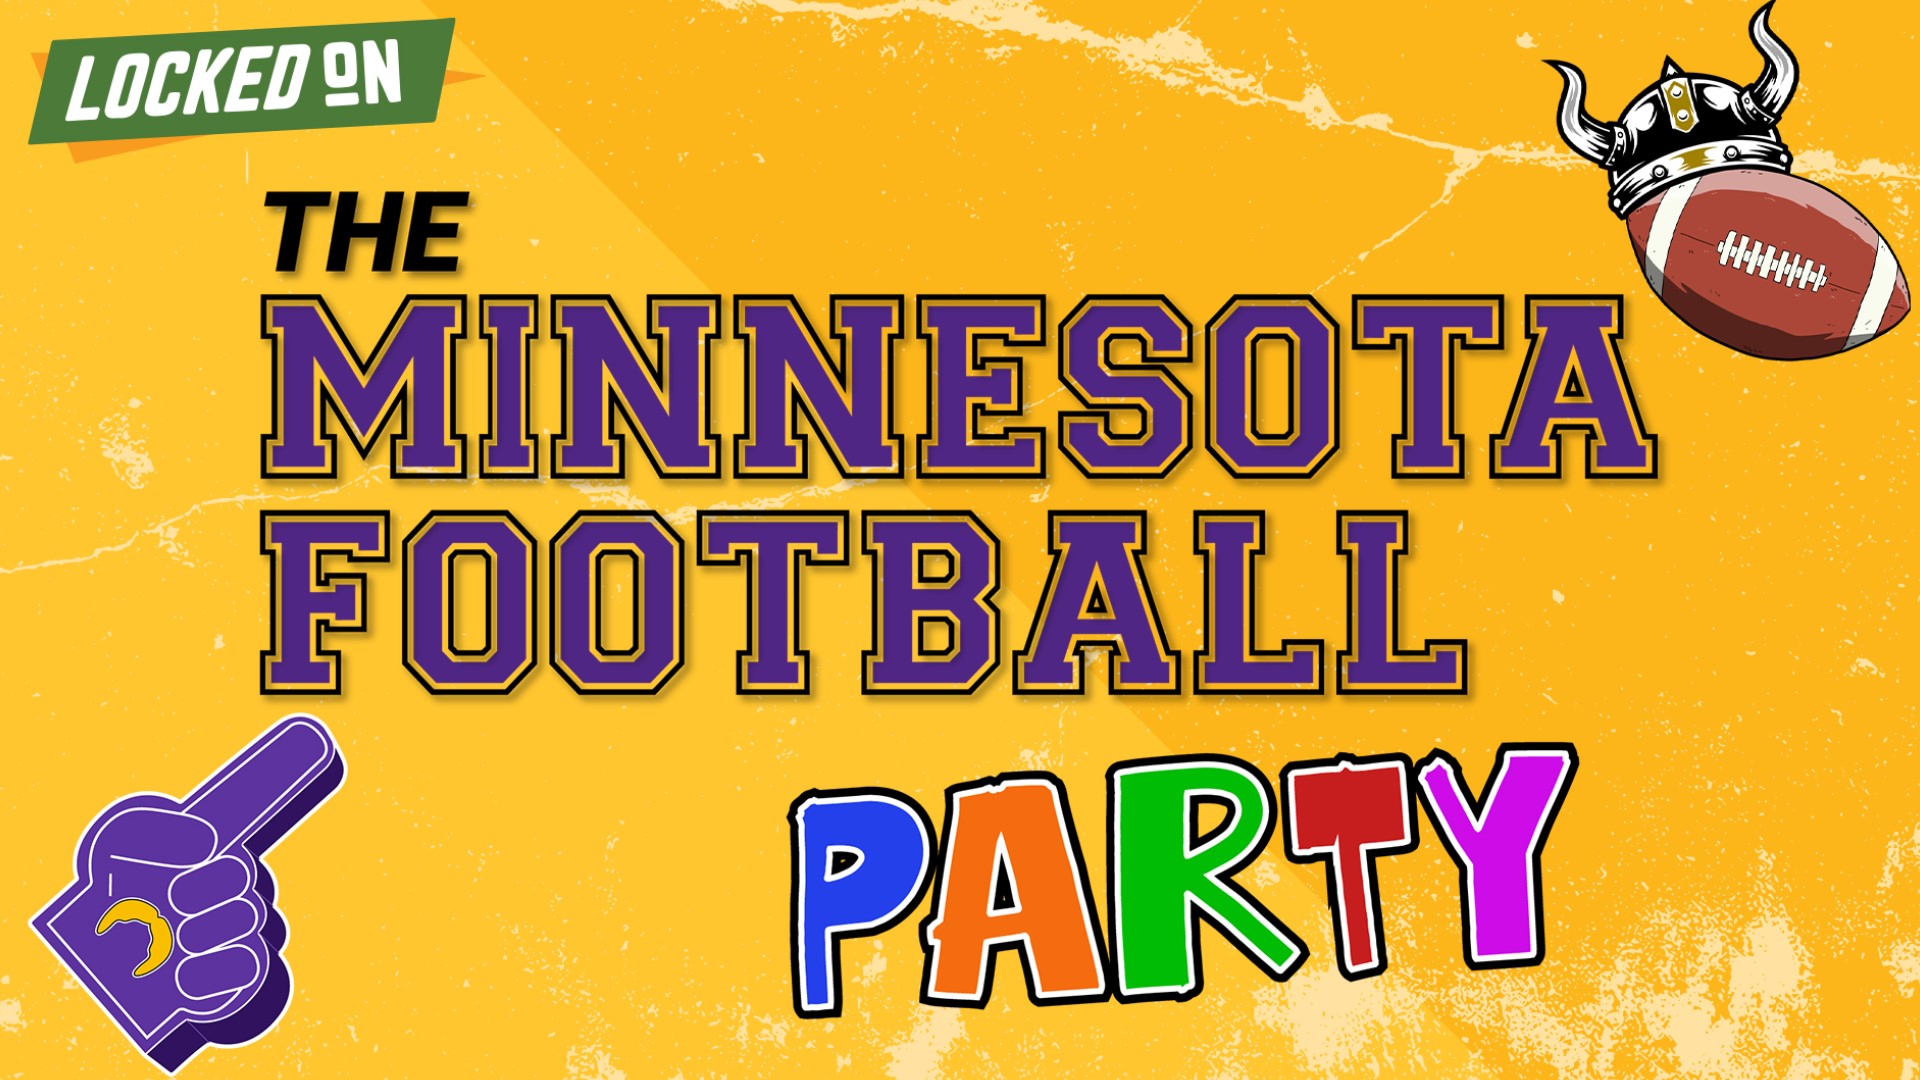 Introducing The Minnesota Football Party! We’re bringing together the best-known, well-versed voices in Minnesota football, talking Vikings football twice a week.